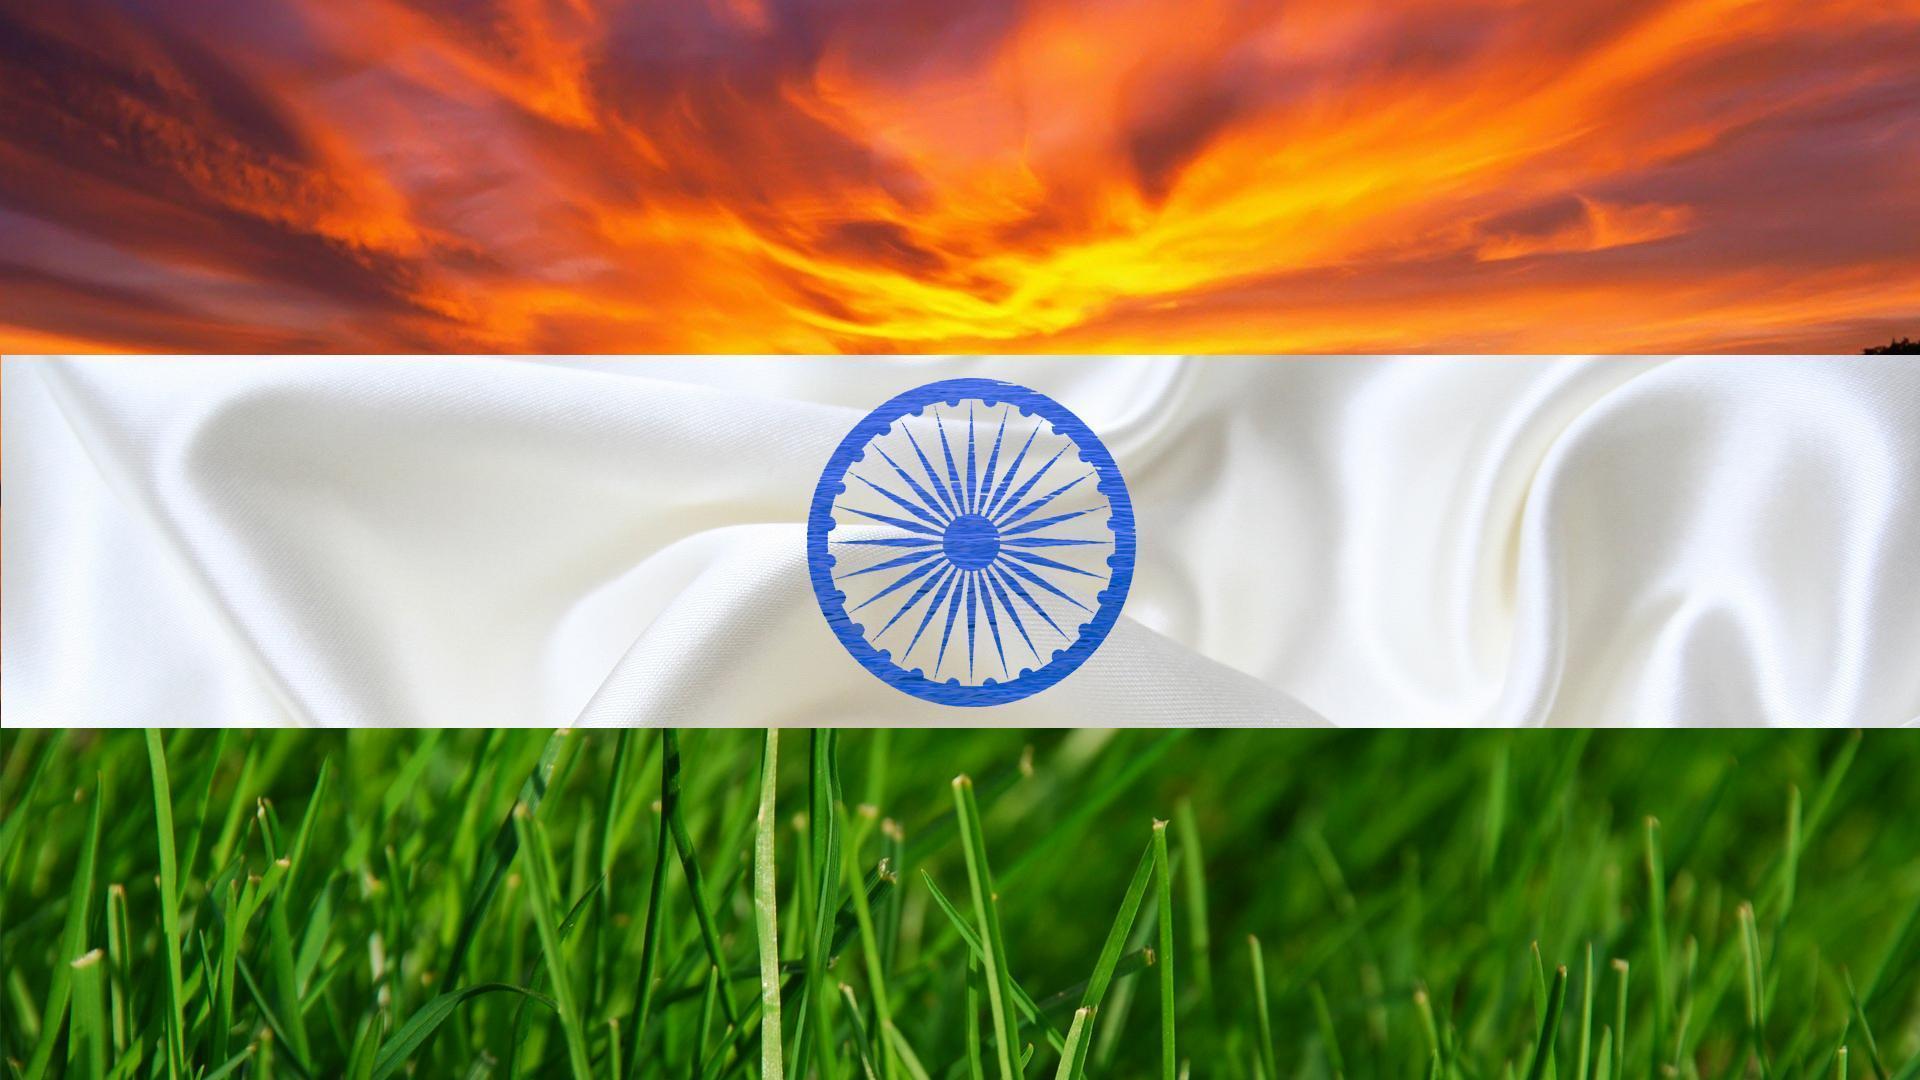 Download Latest Indian Flag Image For WhatsApp Dp&;s, Facebook